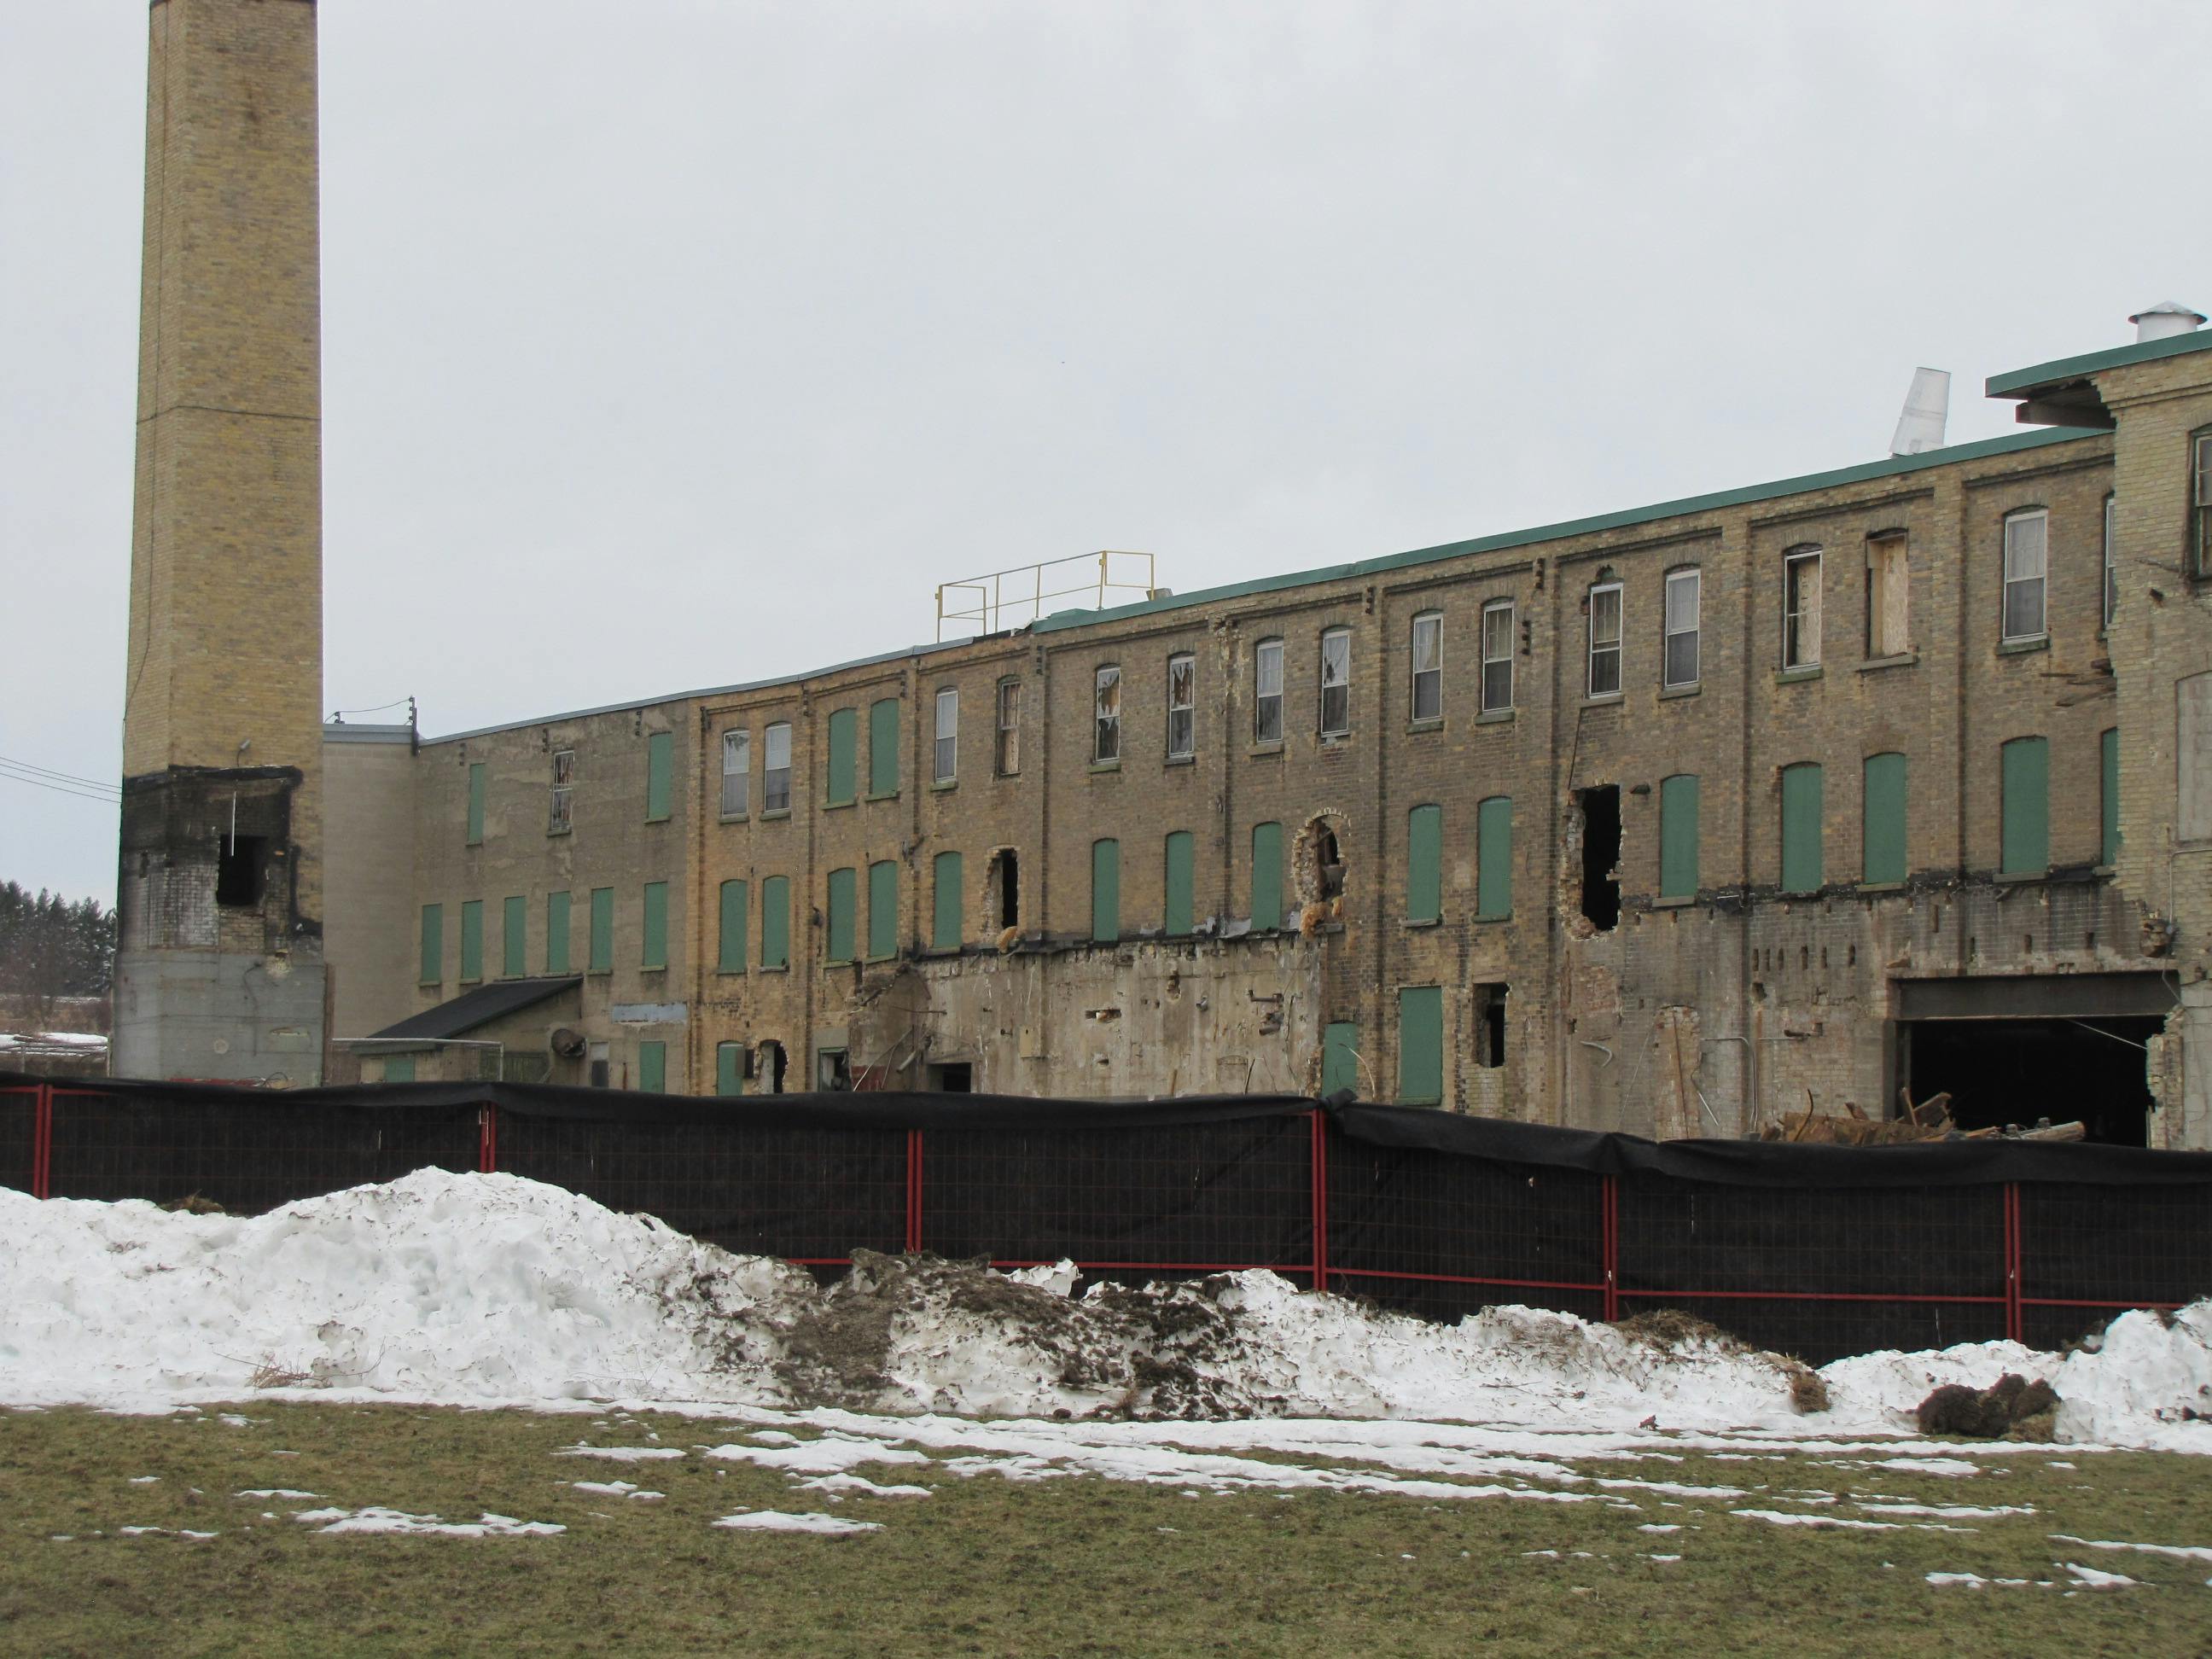 Demolition of Bogdon and Gross - March 11, 2021